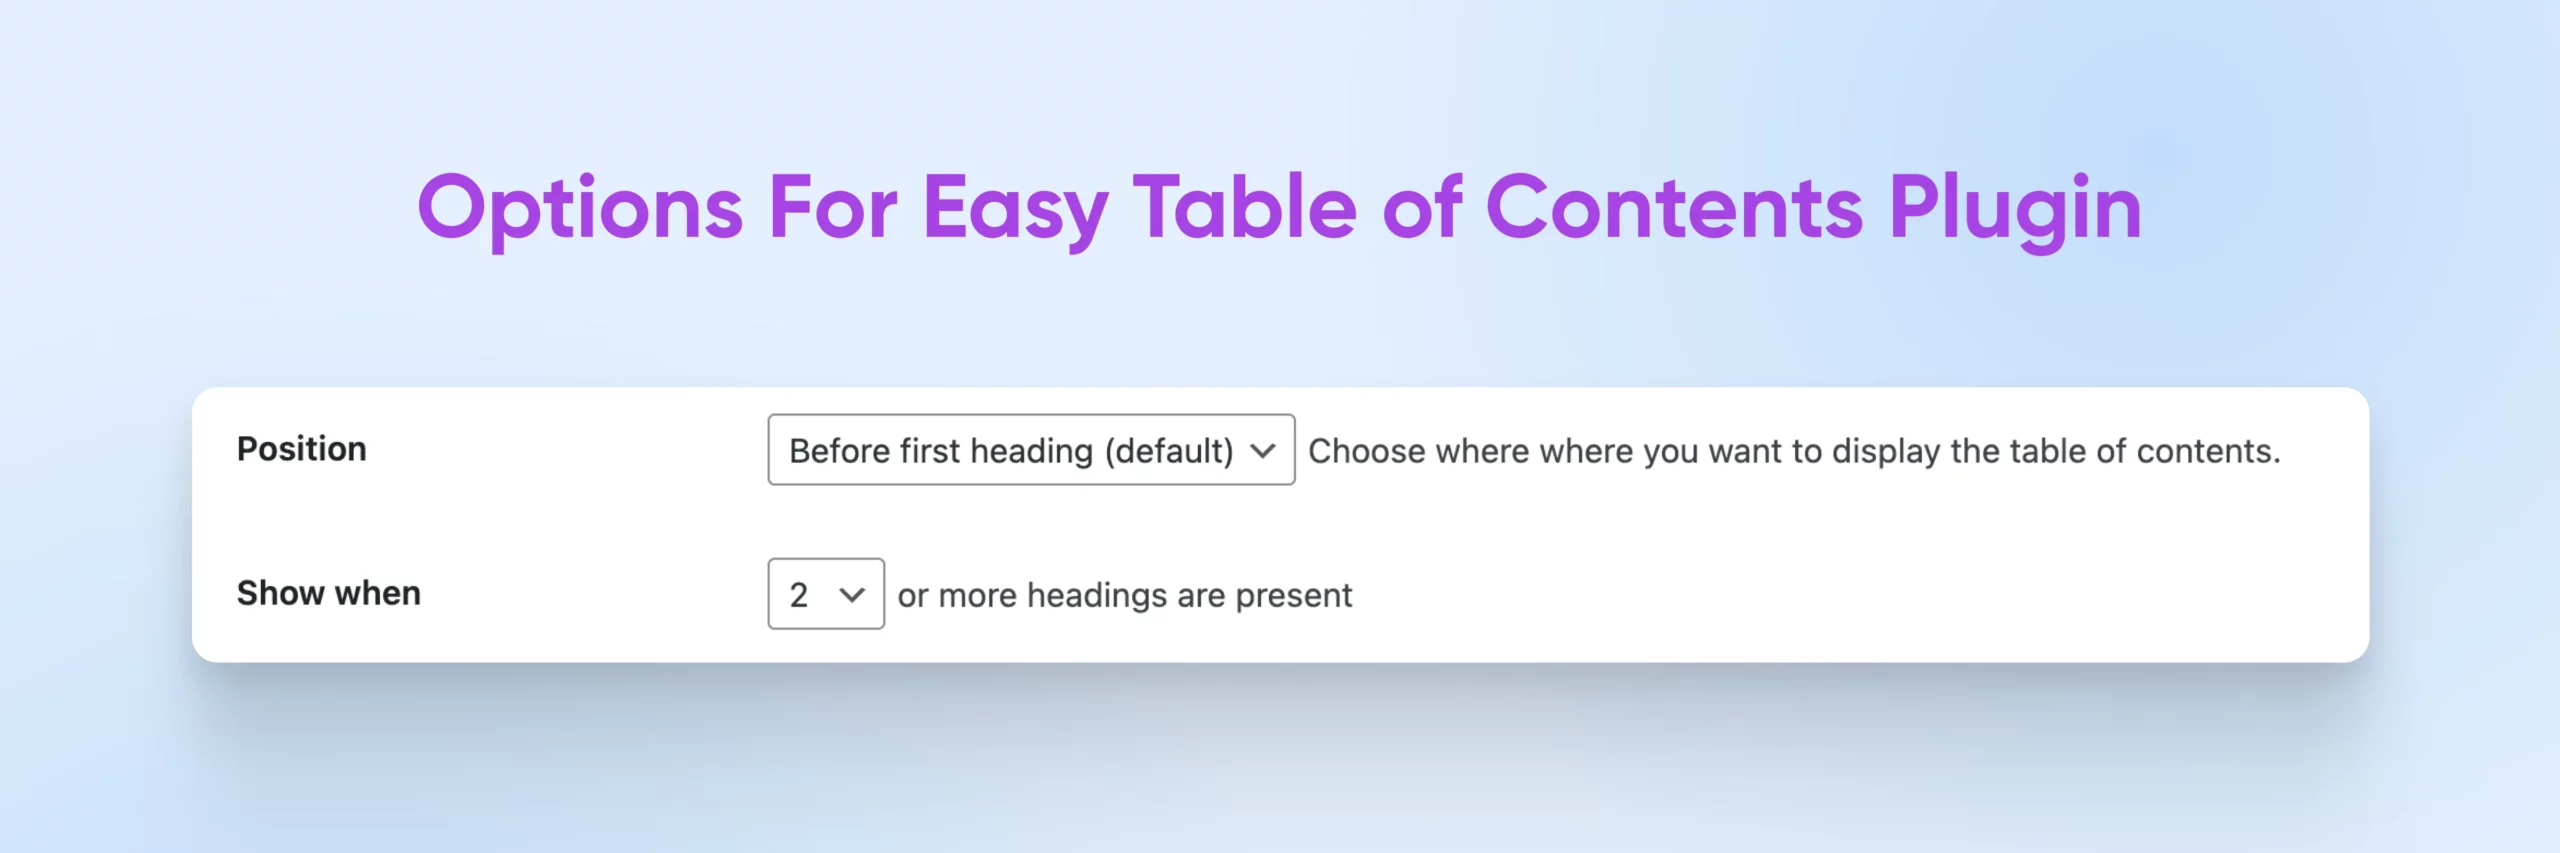 options for easy table of contents plugin showing options for position and show when